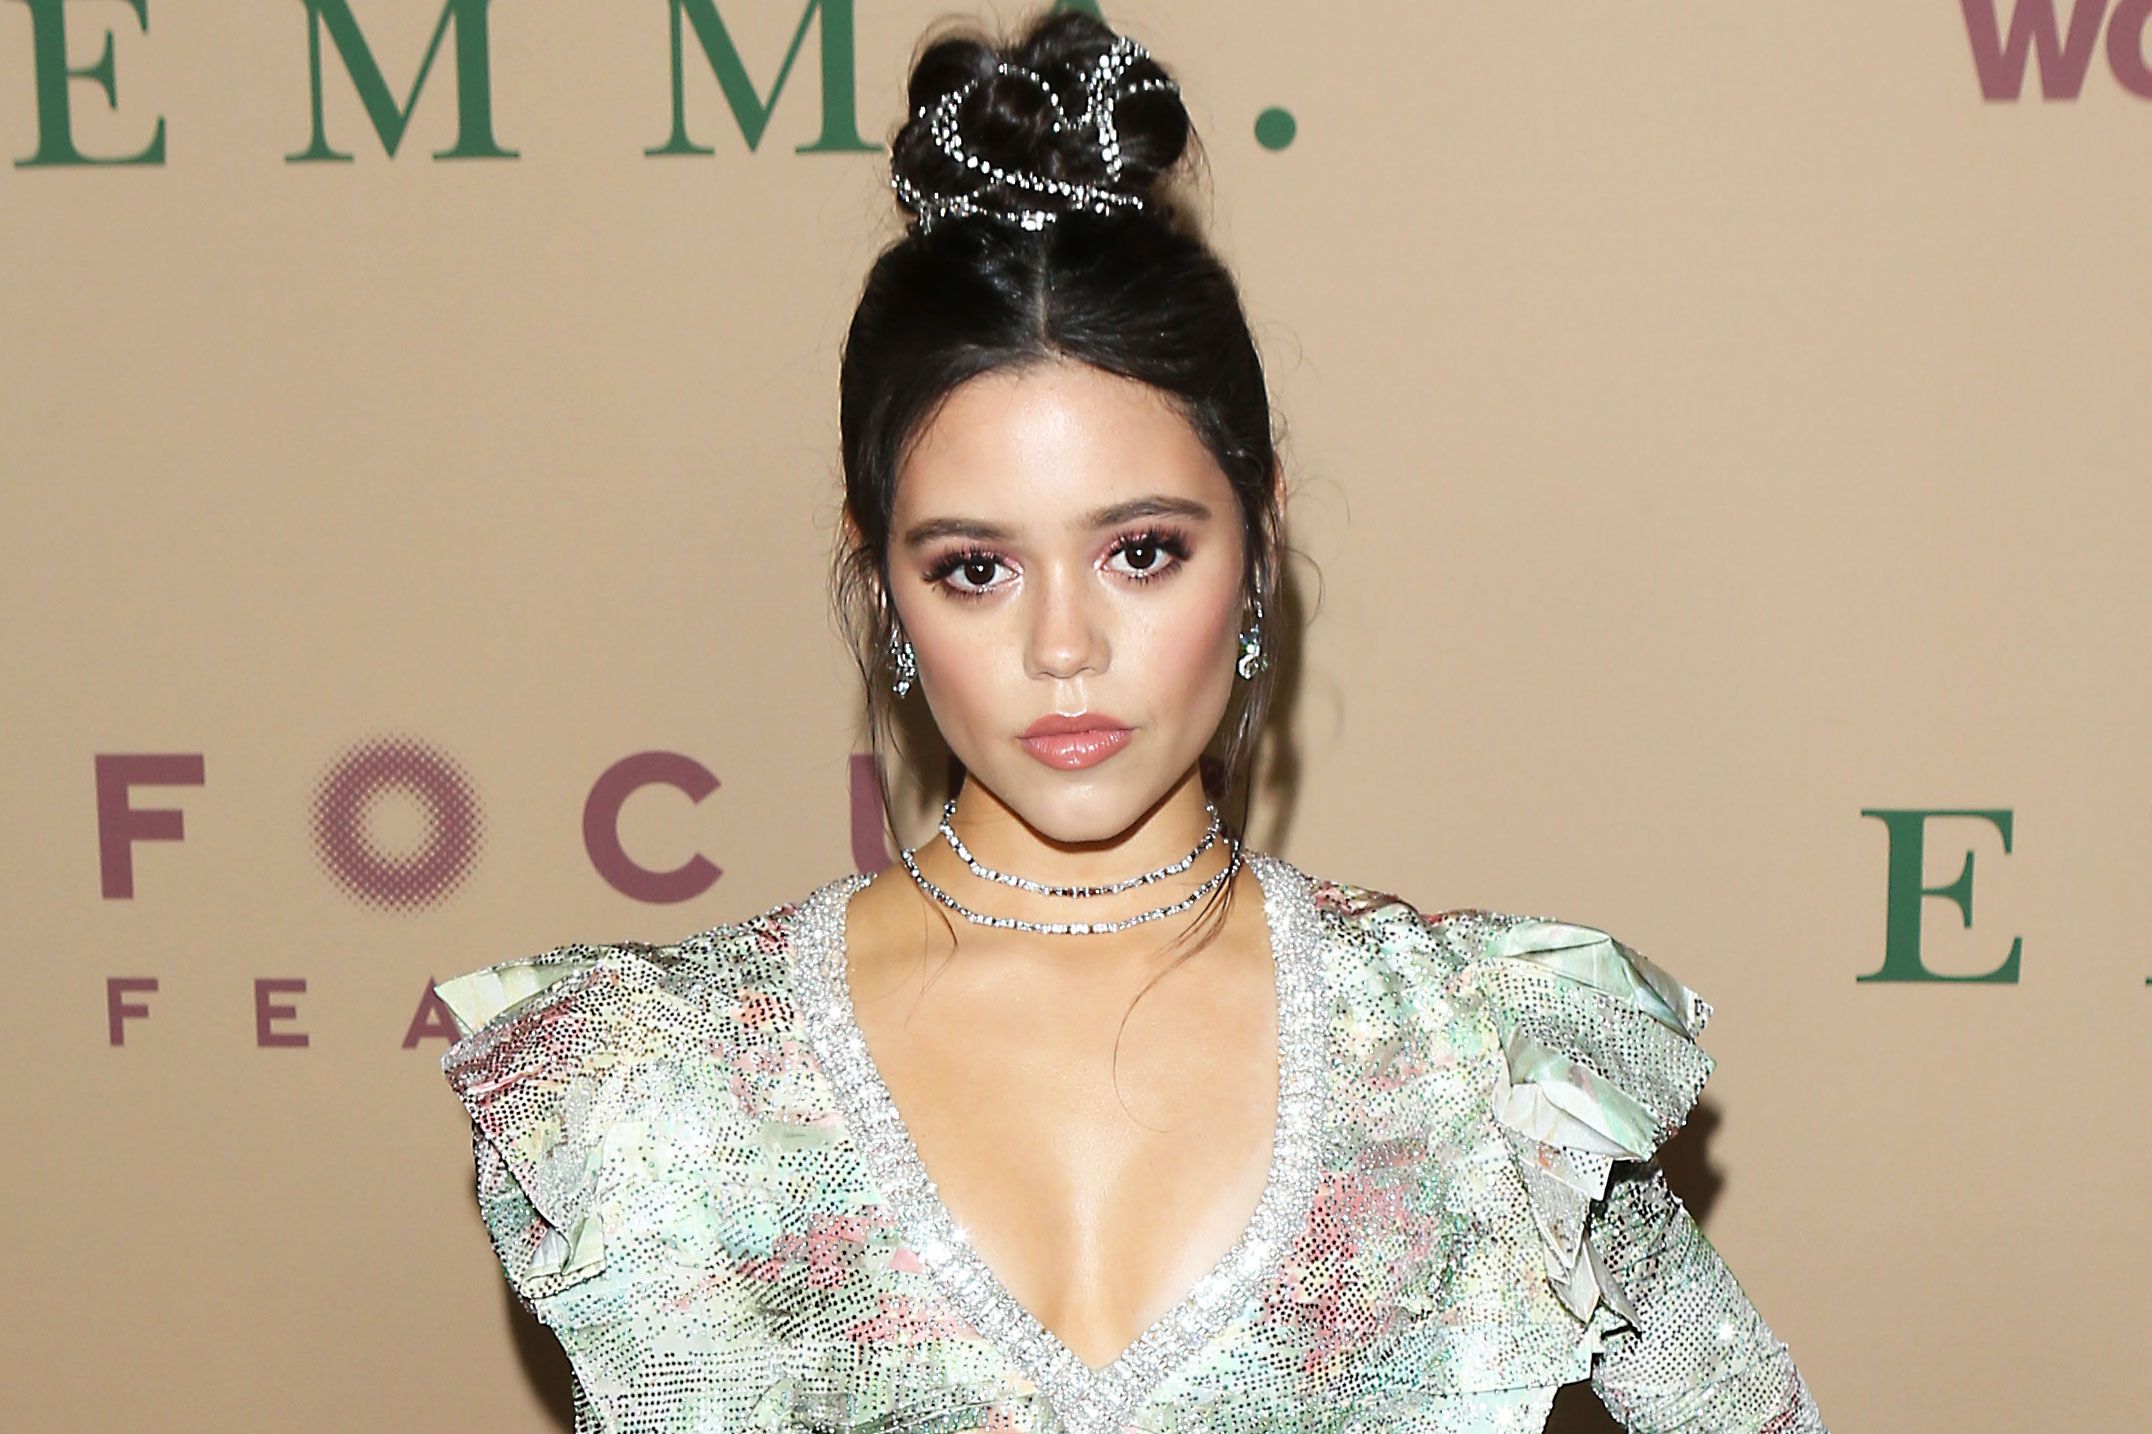 Wednesday What Is Jenna Ortega's Net Worth? All You Need To Know!Addams Netflix Show Casts Jenna Ortega as Lead